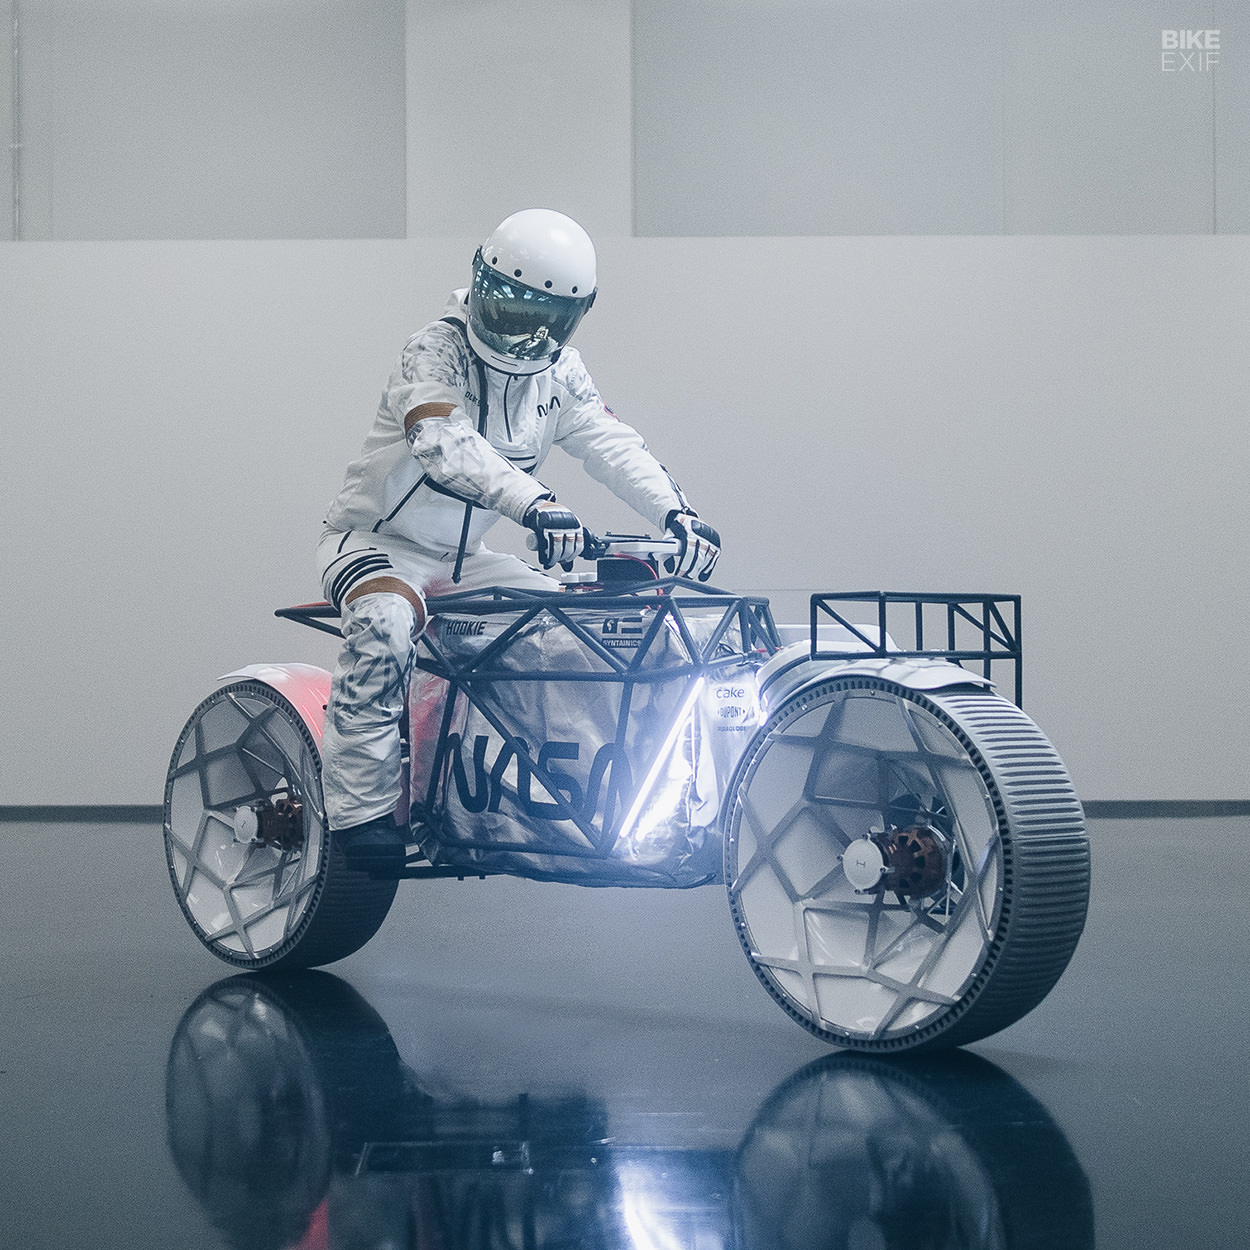 Lunar motorcycle: We may soon see astronauts move around the lunar surface on a motorbike